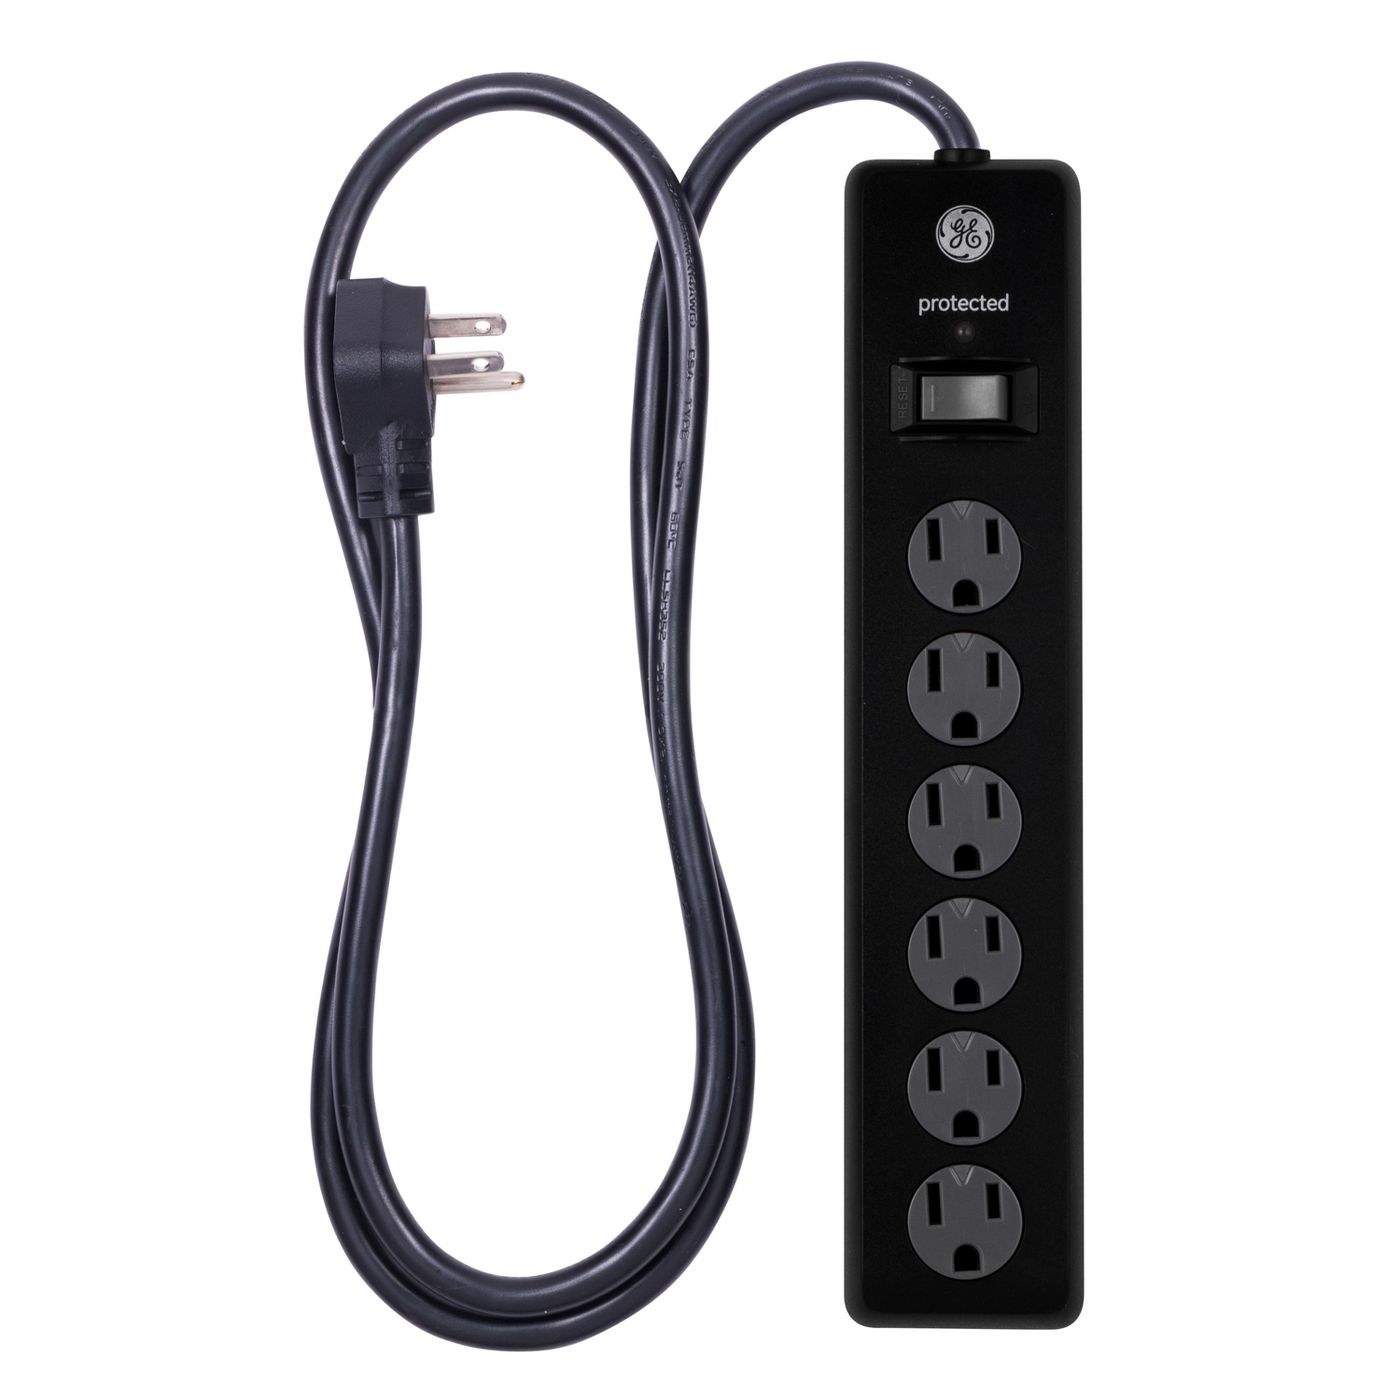 The six-outlet surge protector